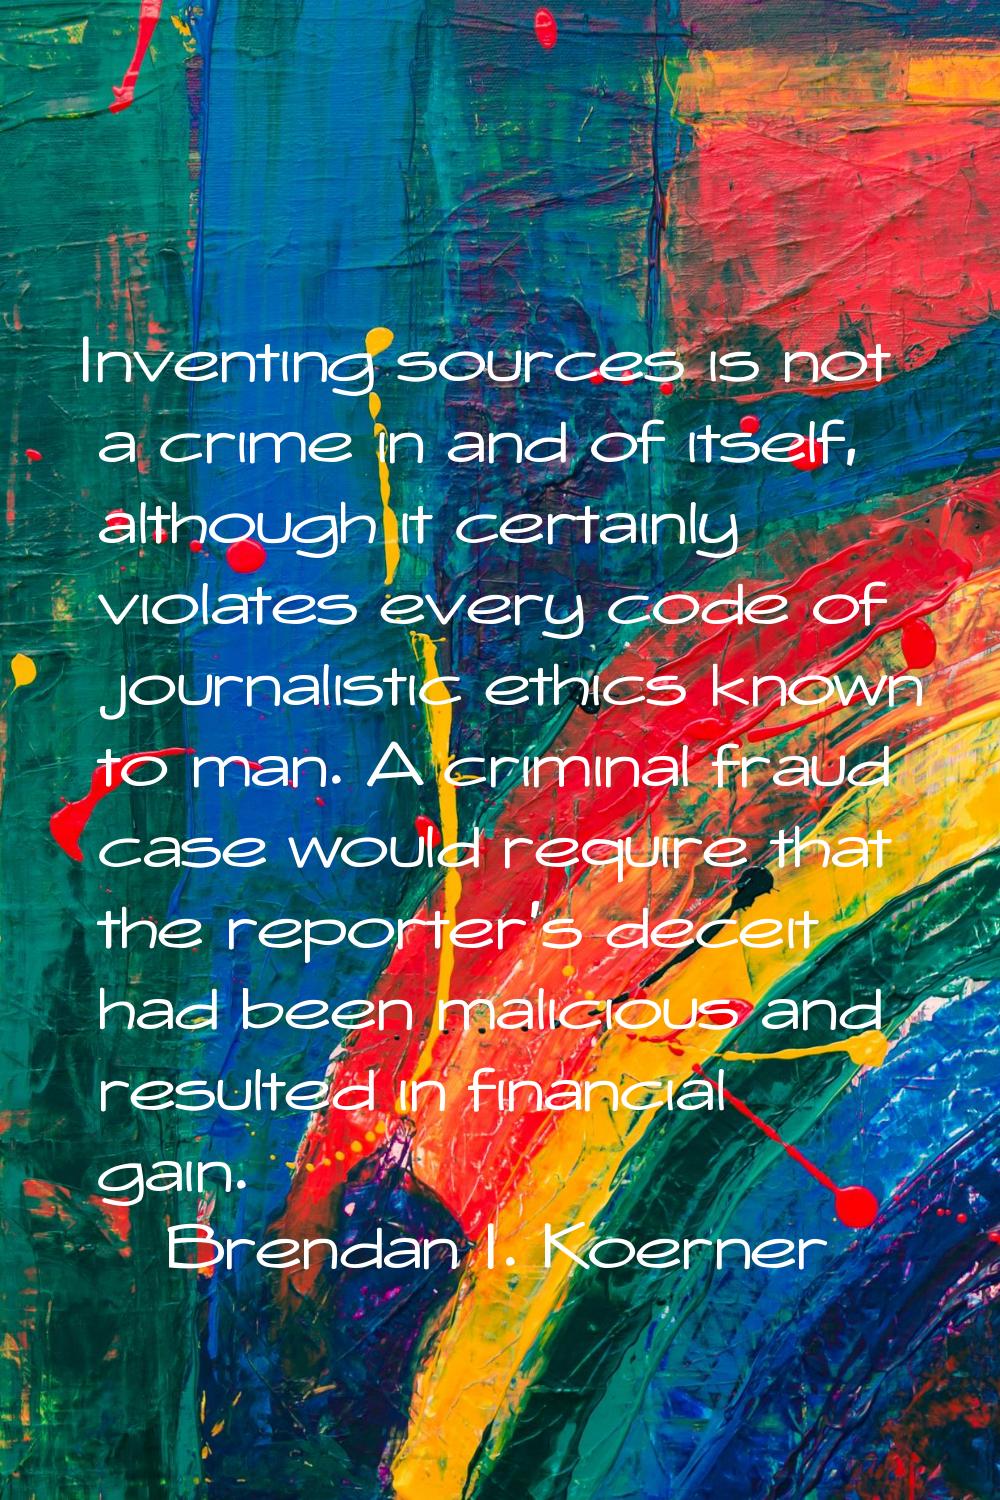 Inventing sources is not a crime in and of itself, although it certainly violates every code of jou